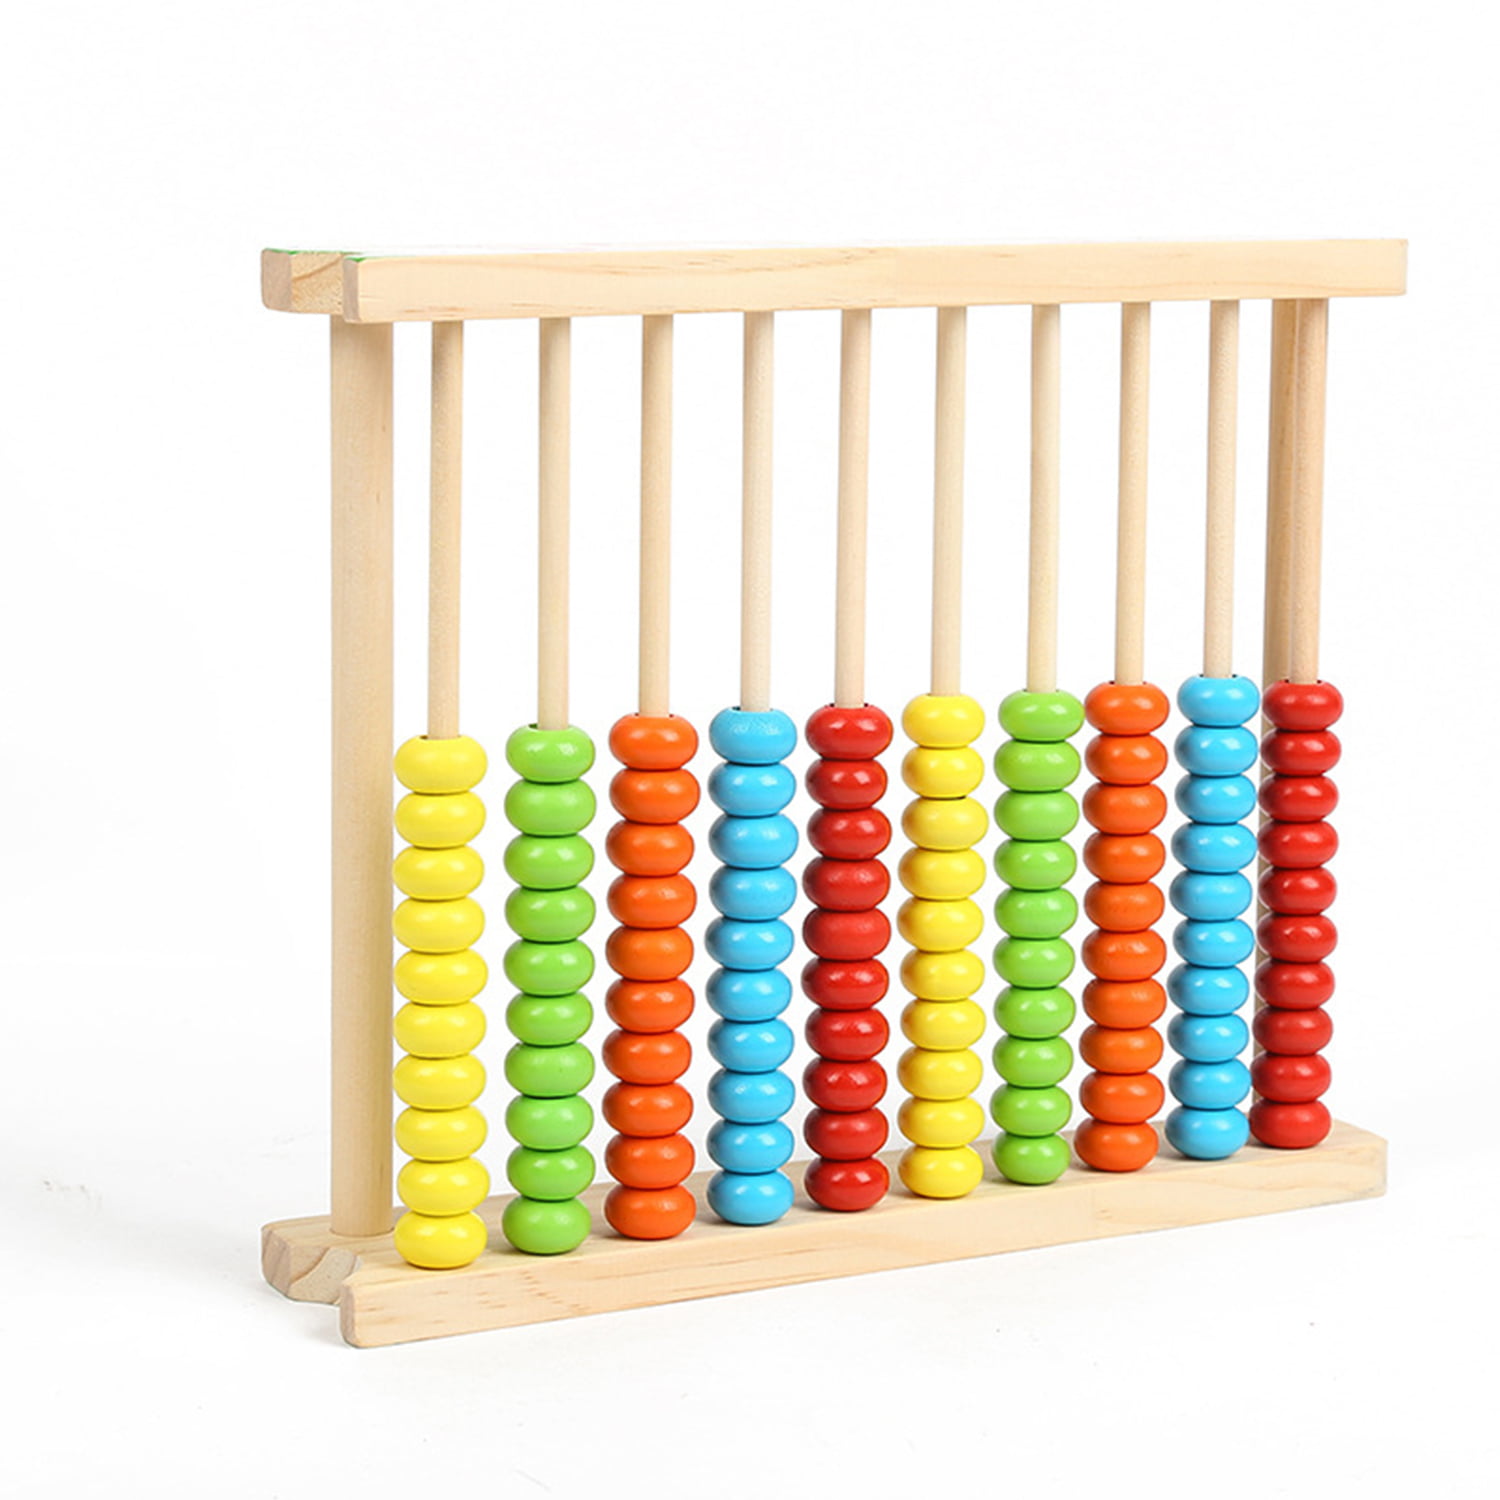 Bead Abacus Counting Number Fun Educational Teaching Kids Toy Gift LP 